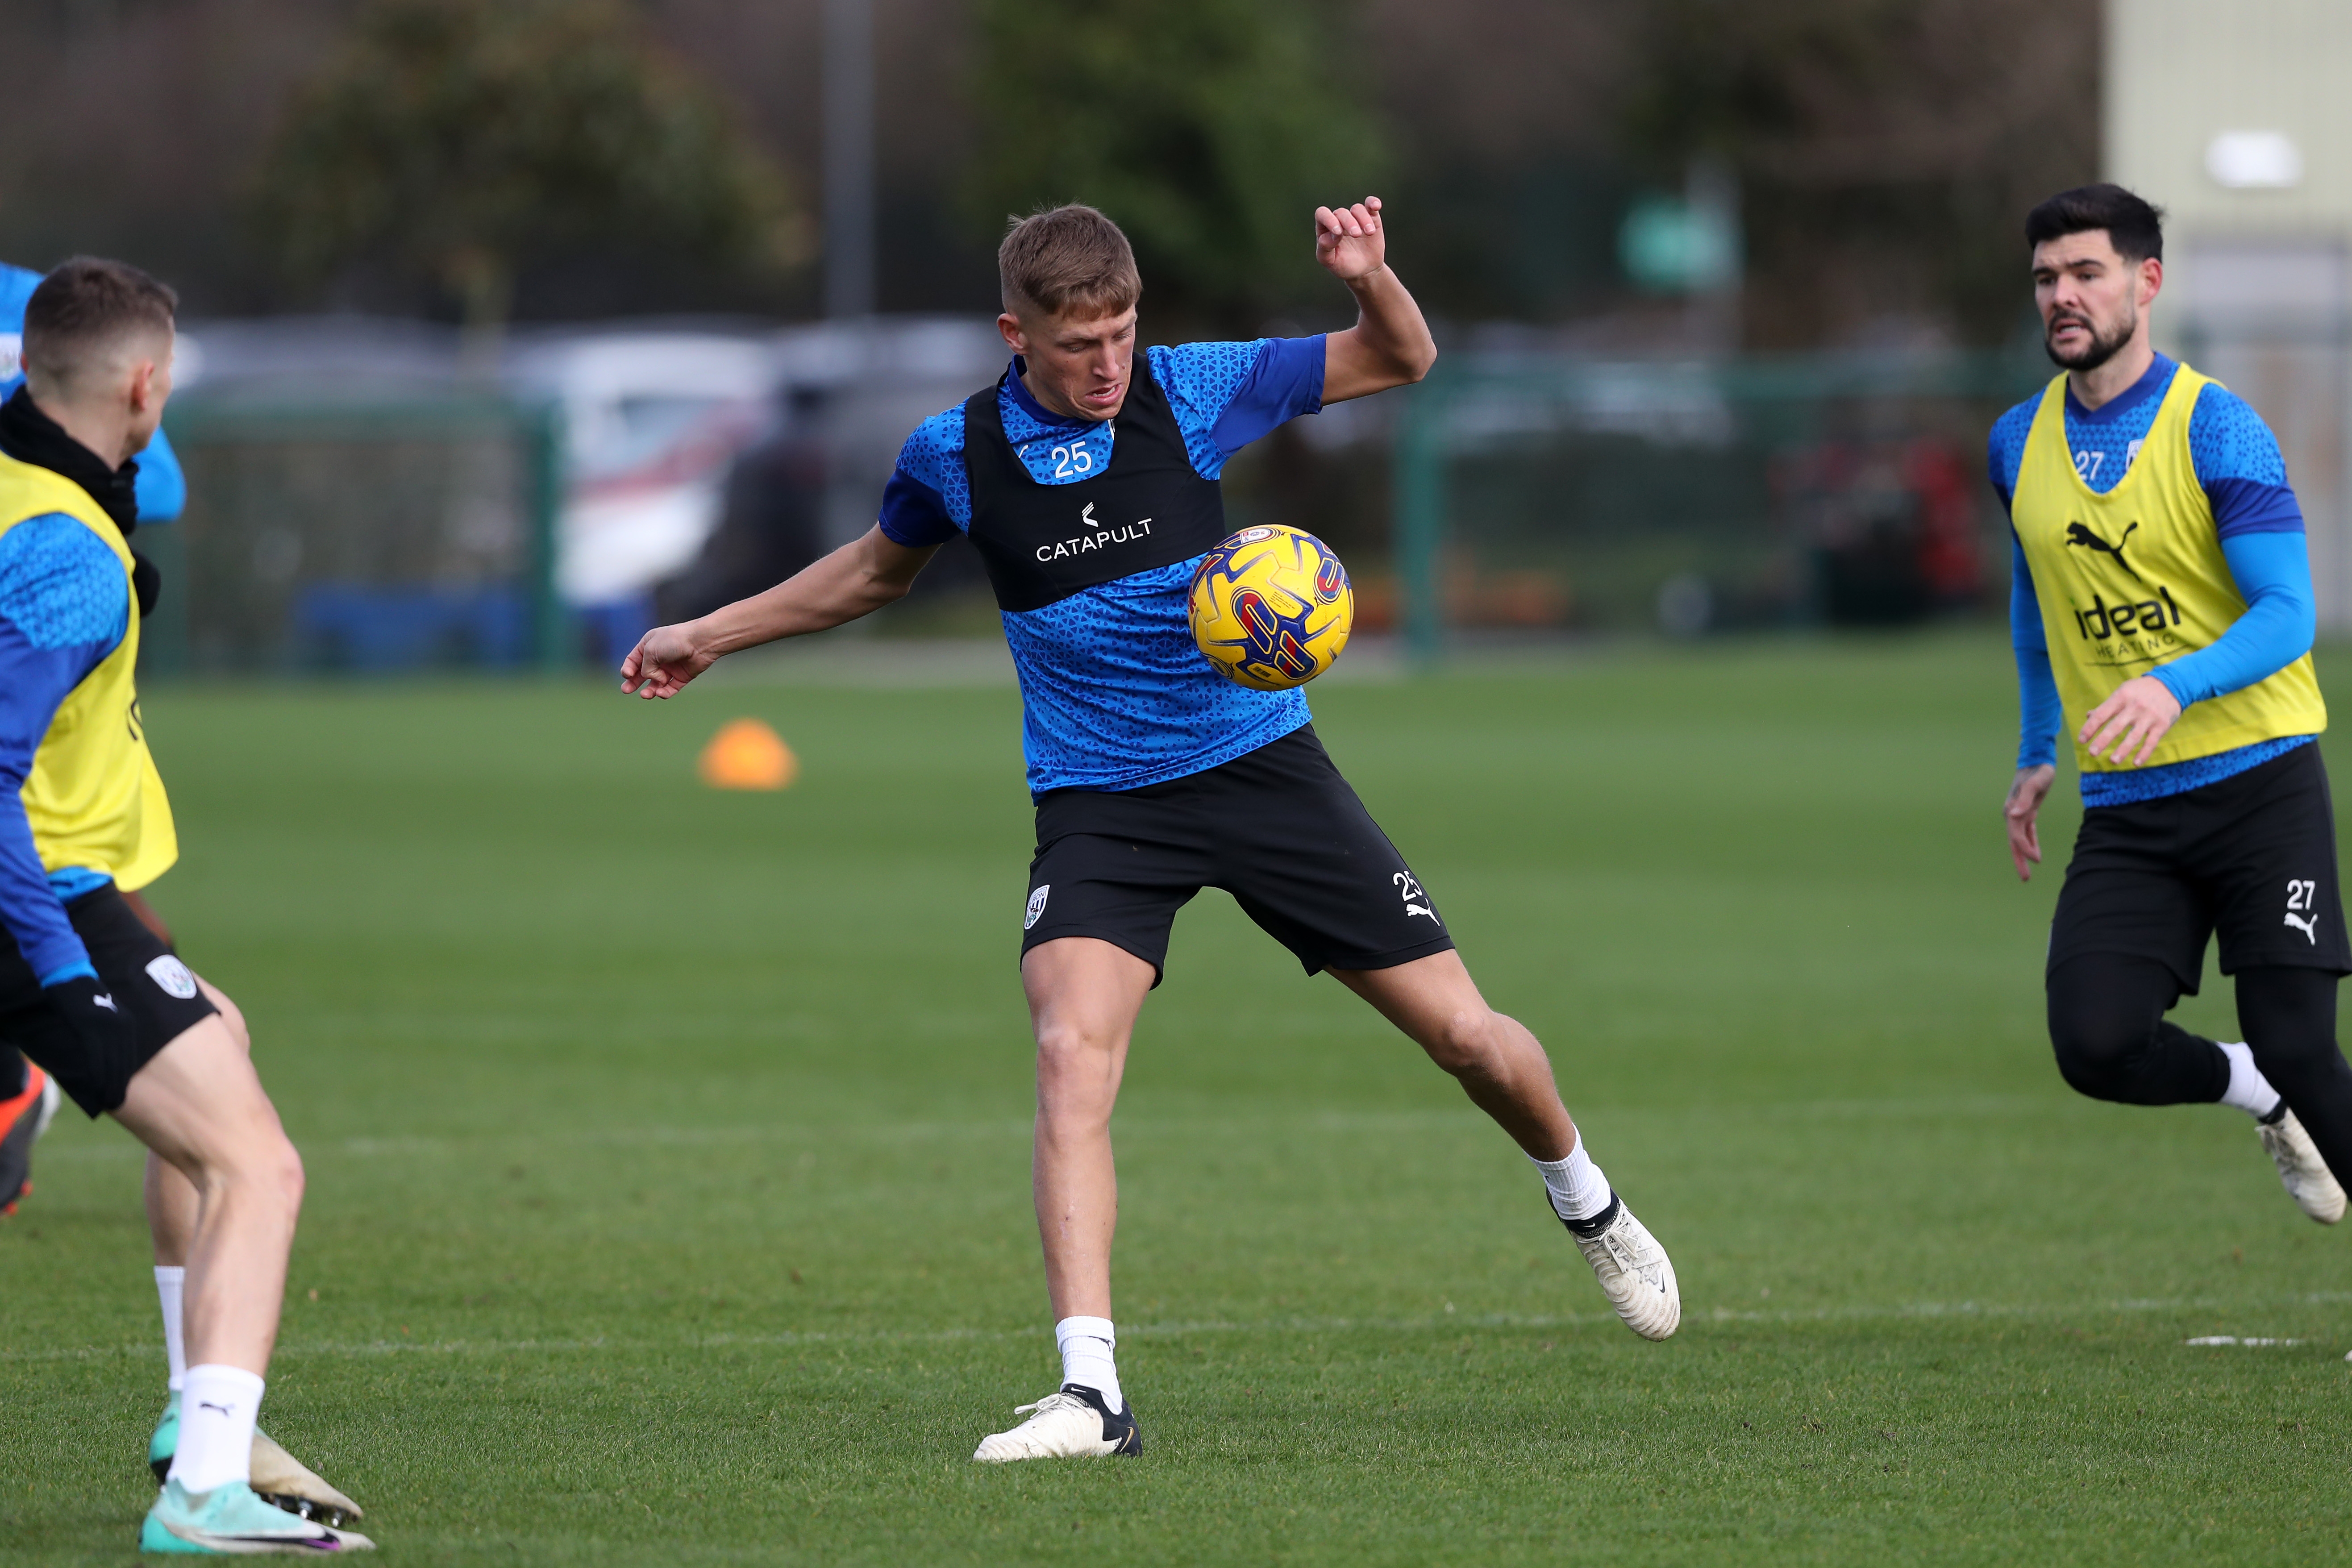 Callum Marshall on the ball during a training session